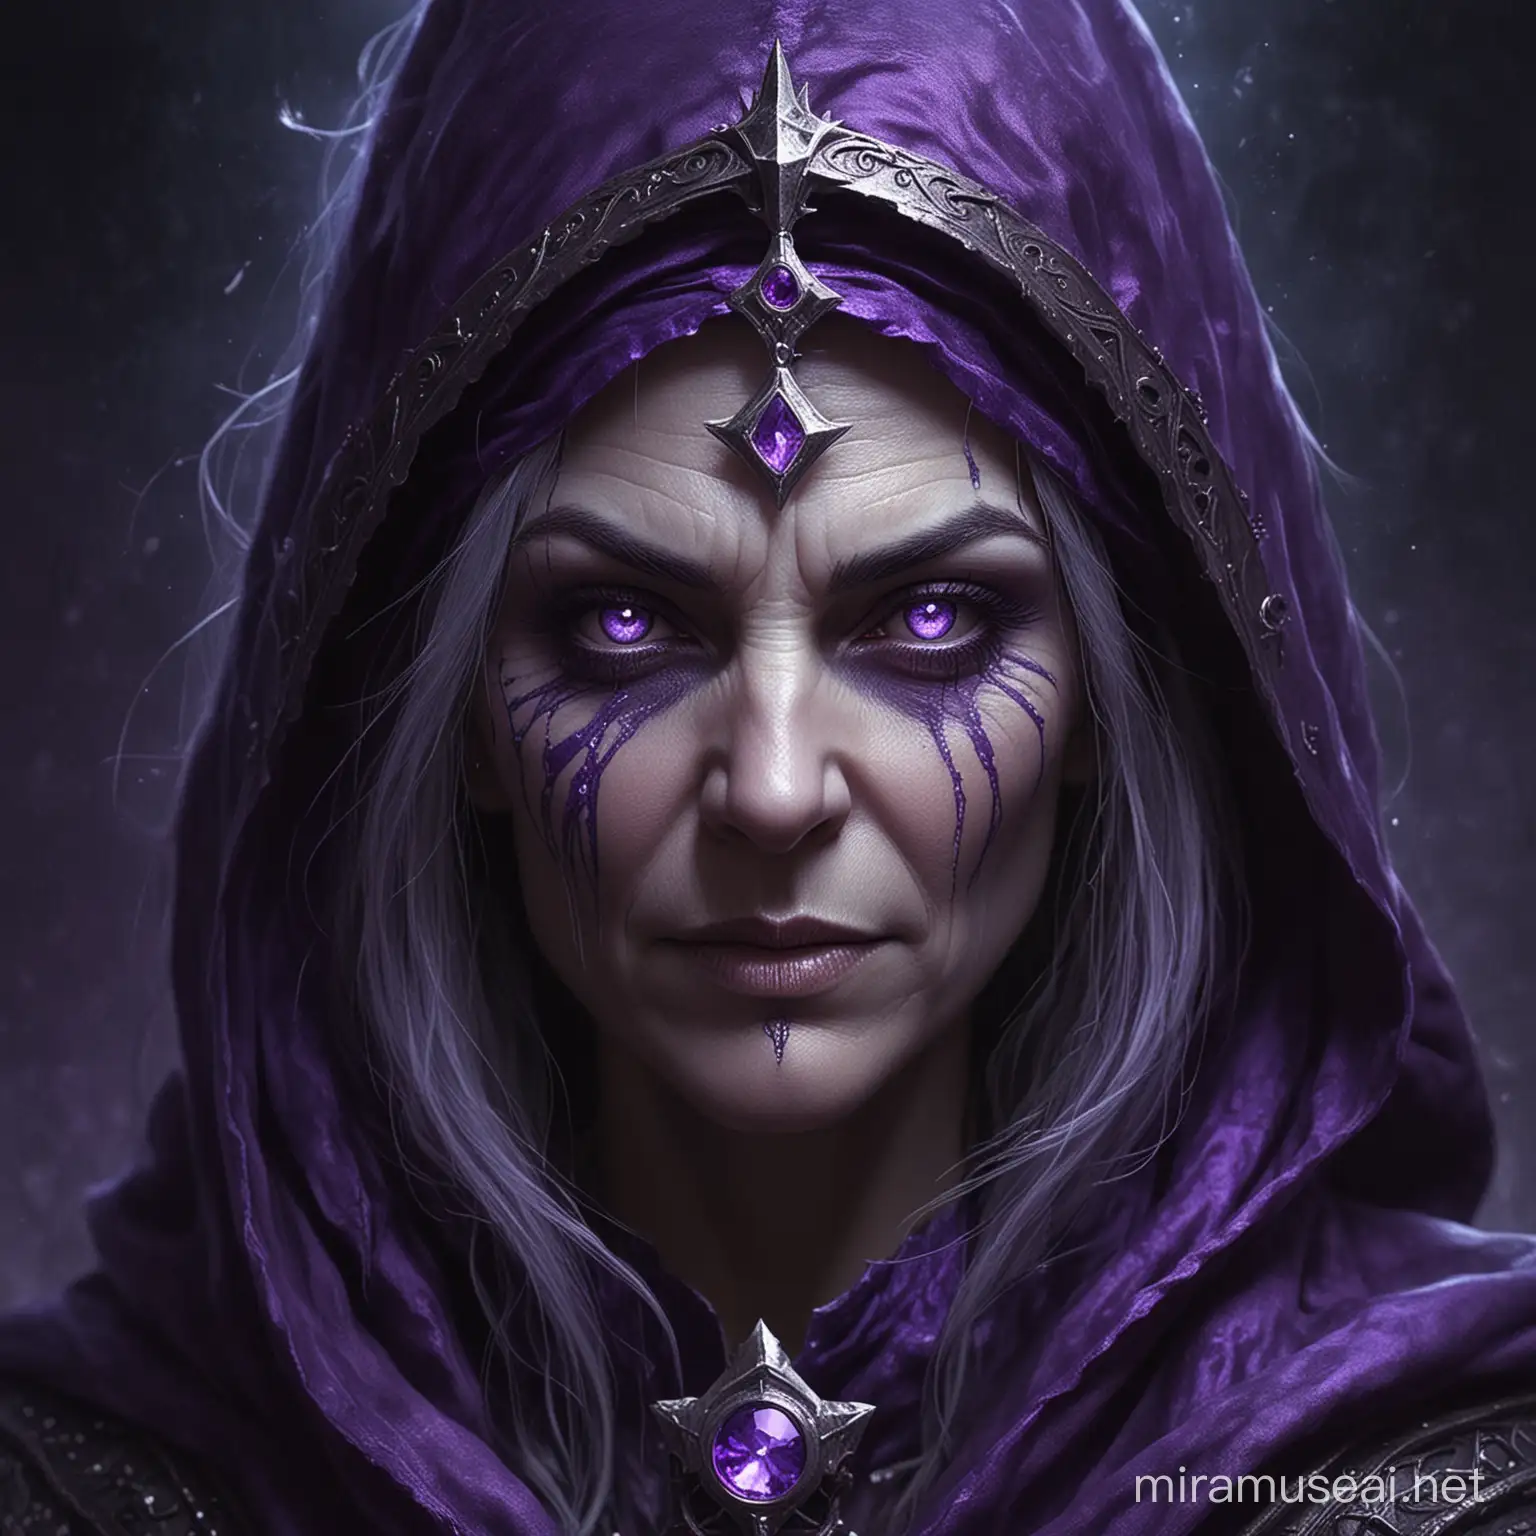 Mysterious Sorceress Queen with a Powerful Aura in Subtle Purple Tones